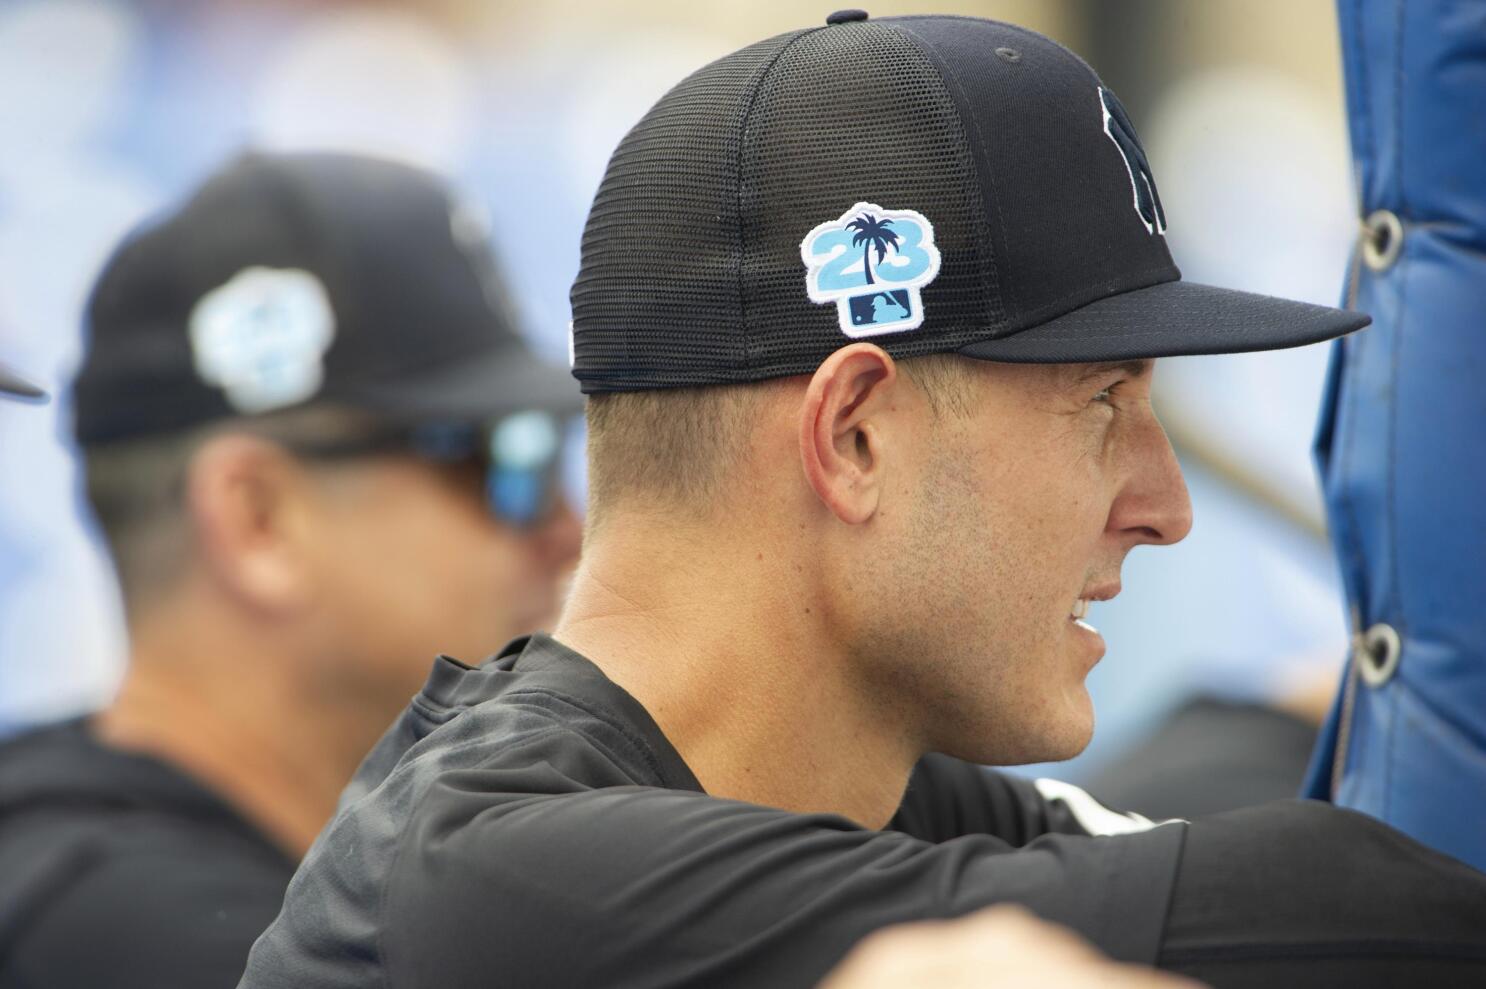 No sour grapes: Rizzo gifts wine to Yankees teammates